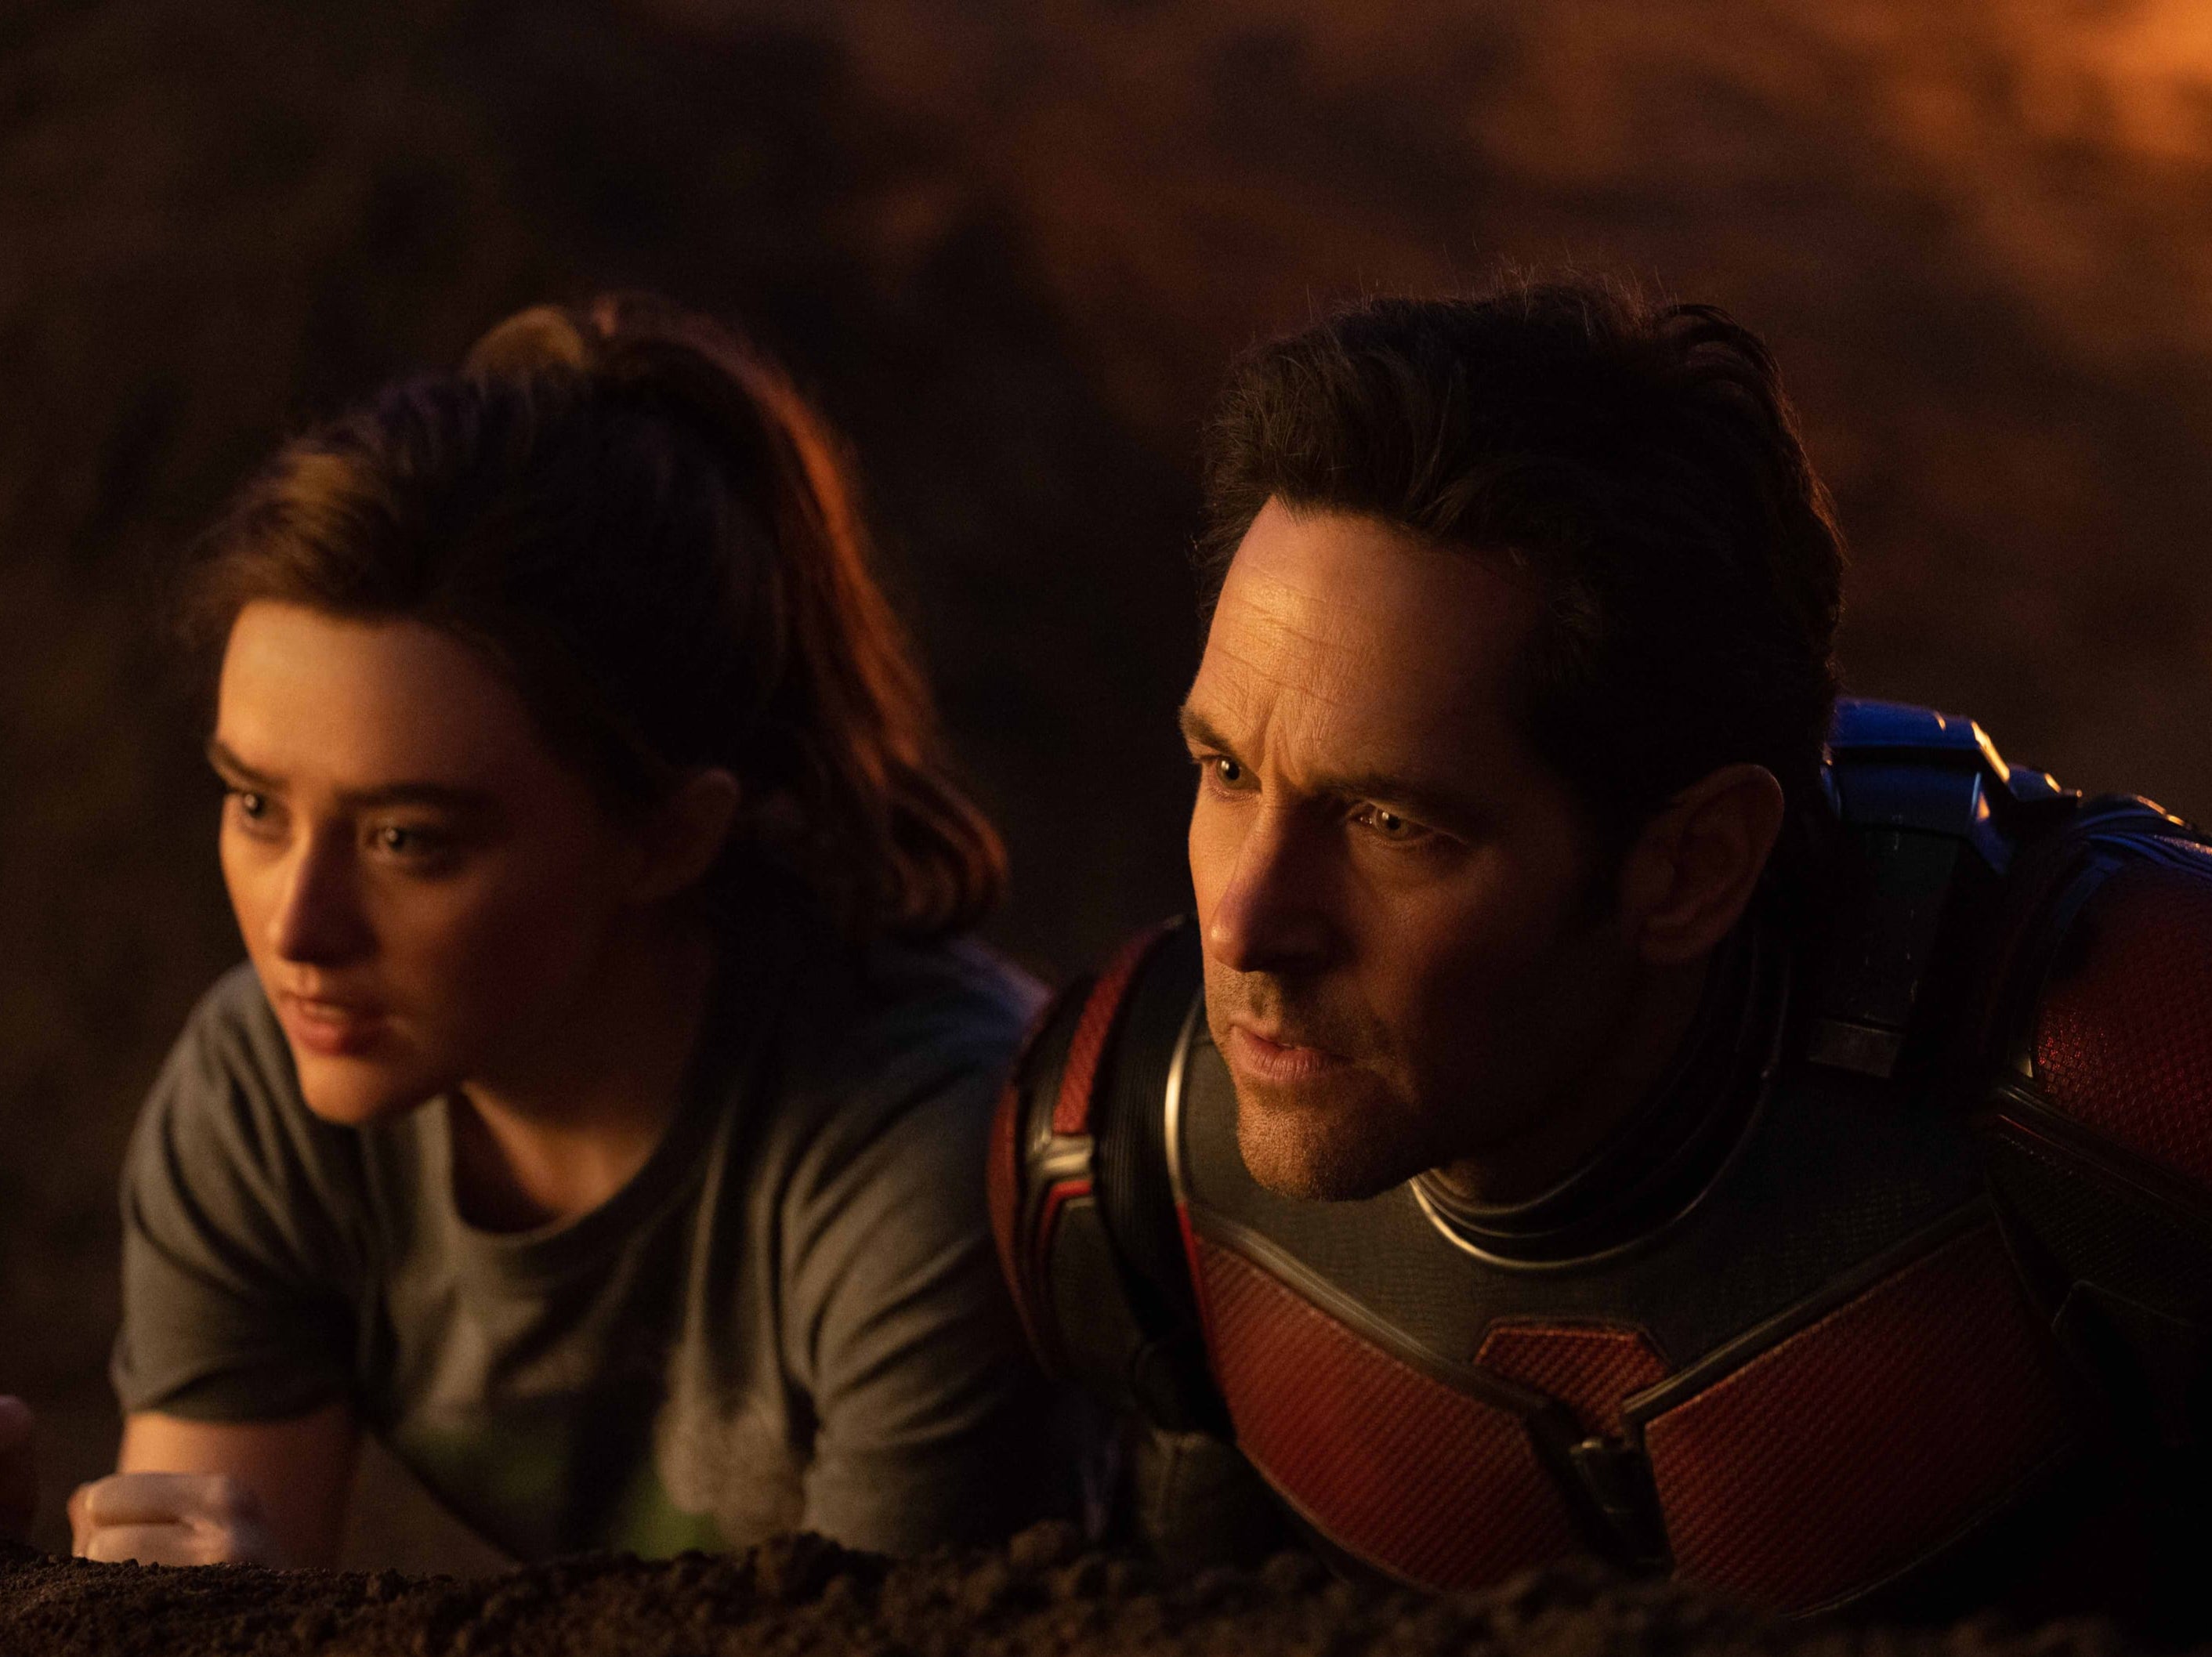 Which cast member is your favorite? Ant-Man and the Wasp